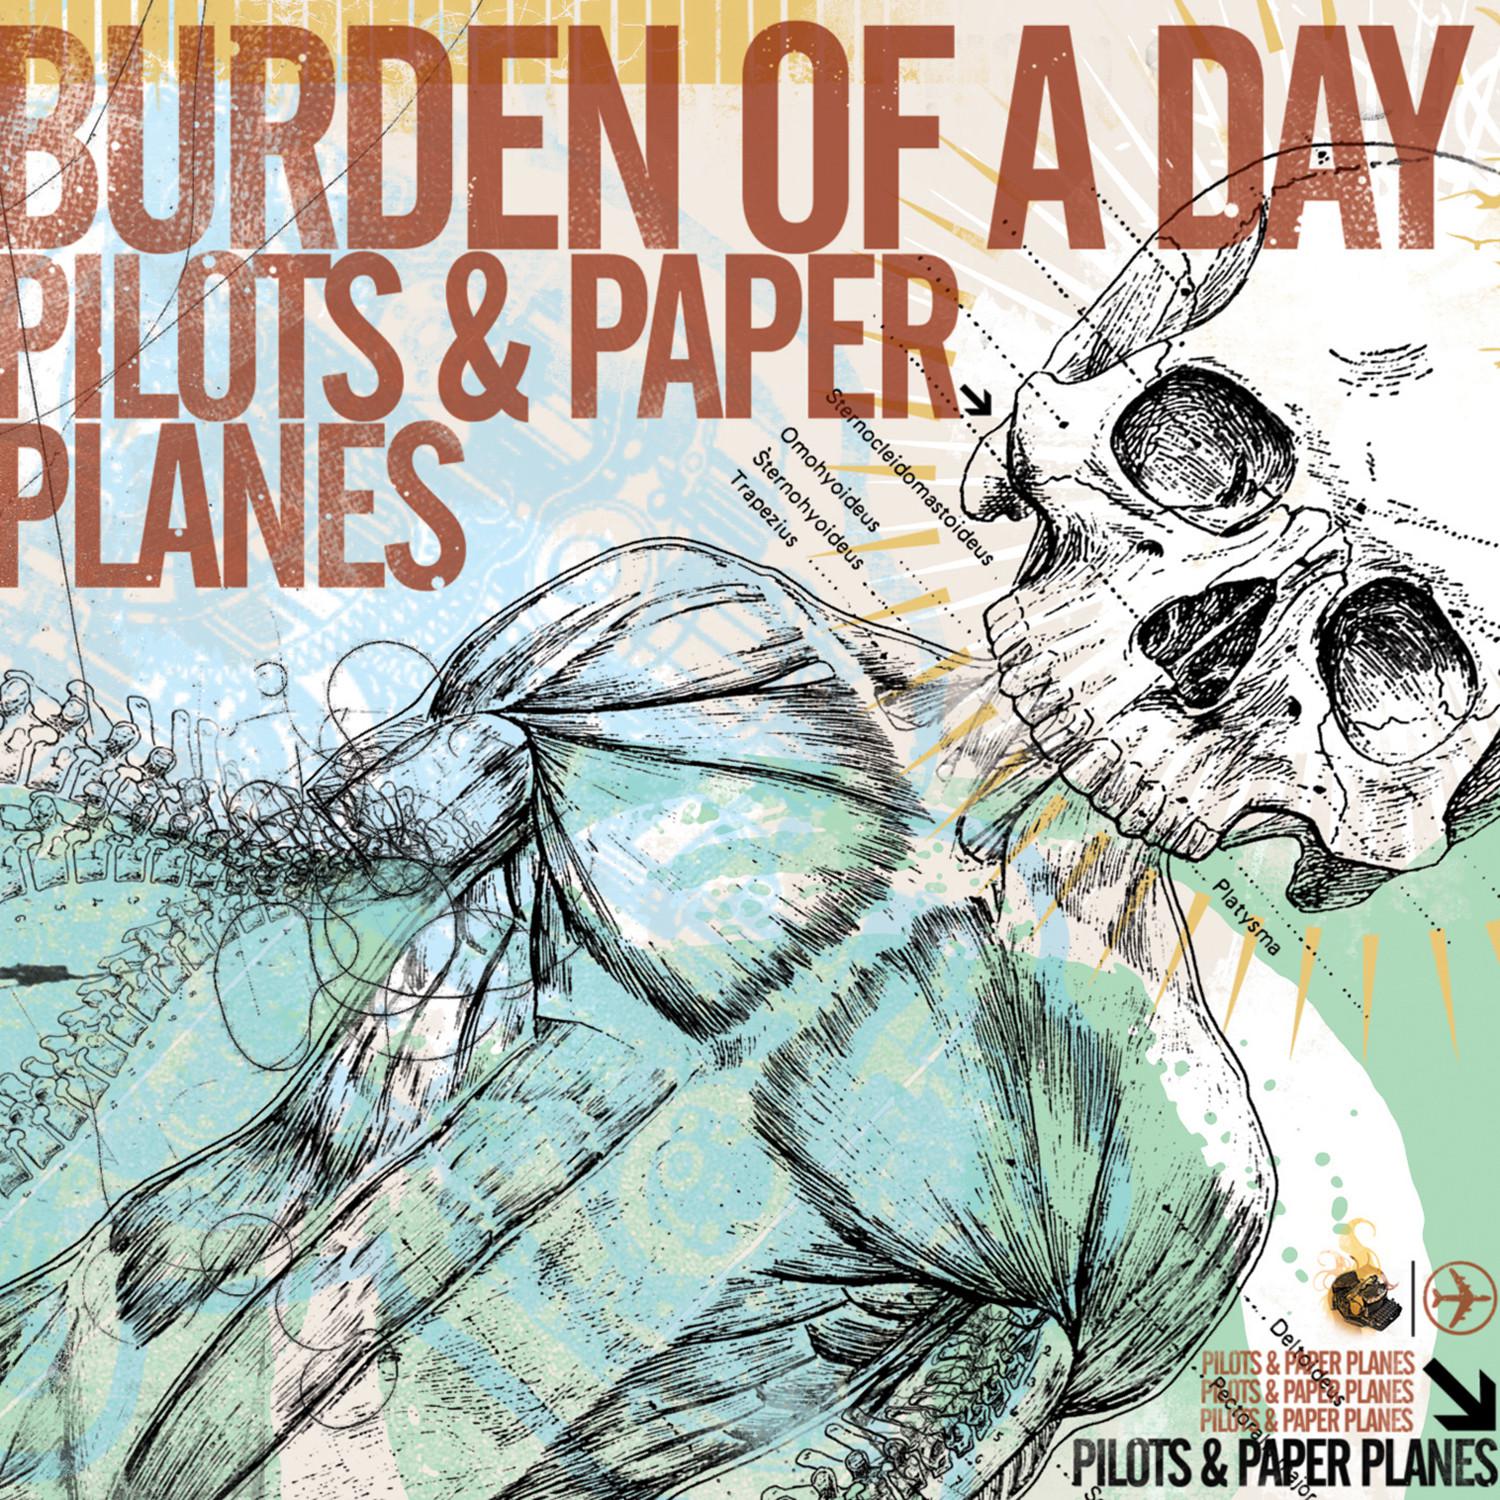 Burden of a Day - Cupid Missed His Mark